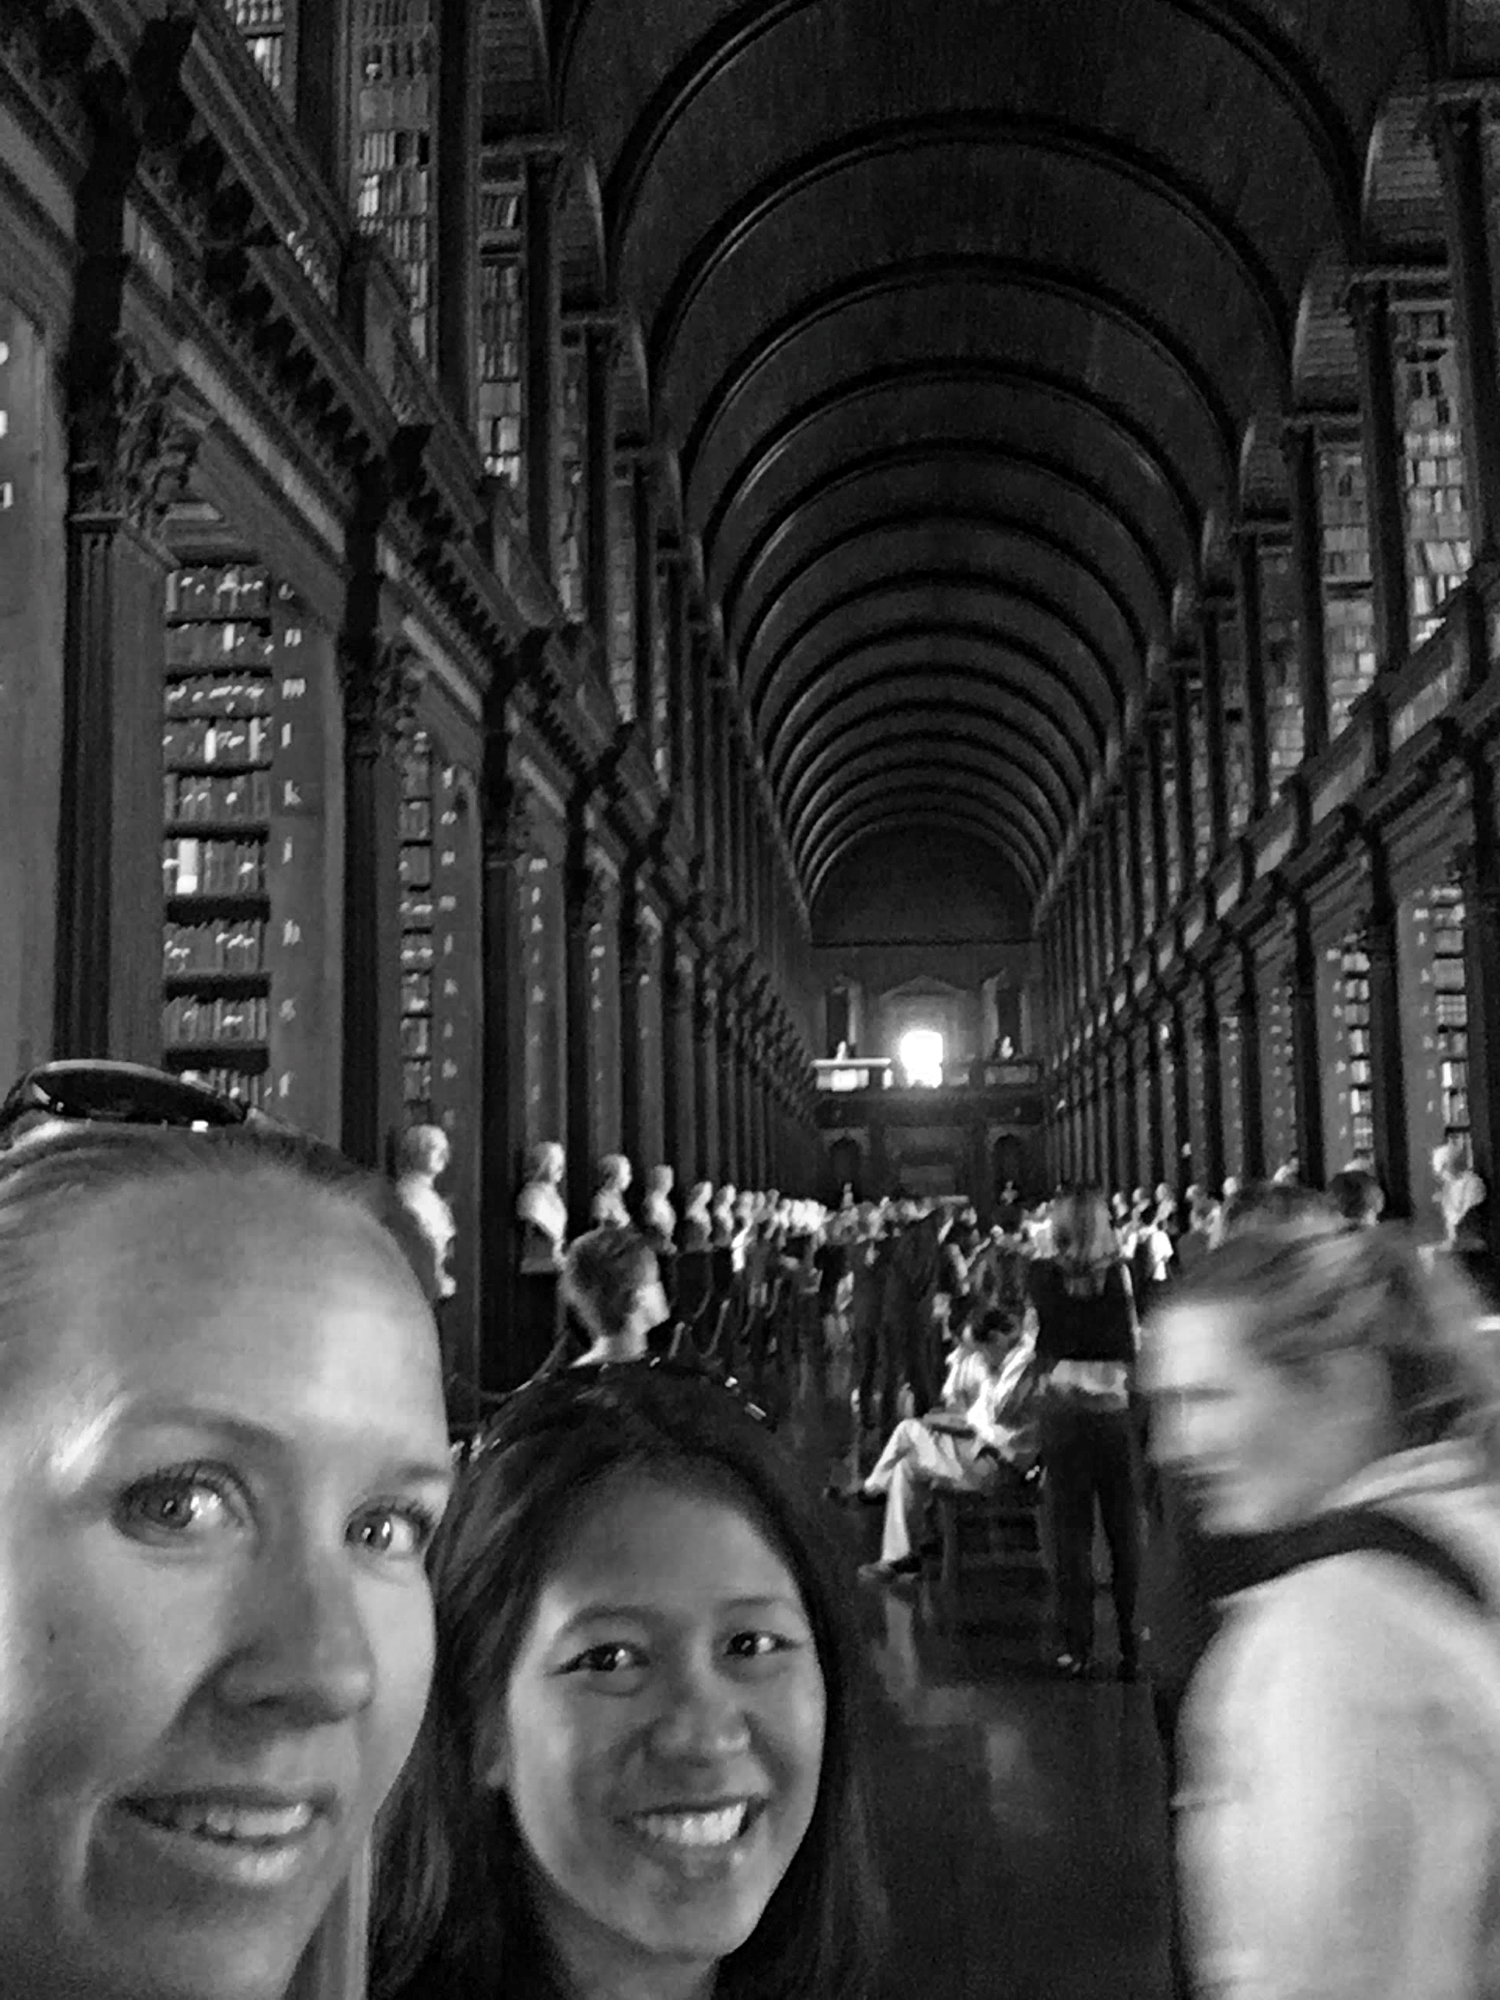 Mrs. Alt and her best friend in the long library at Trinity college